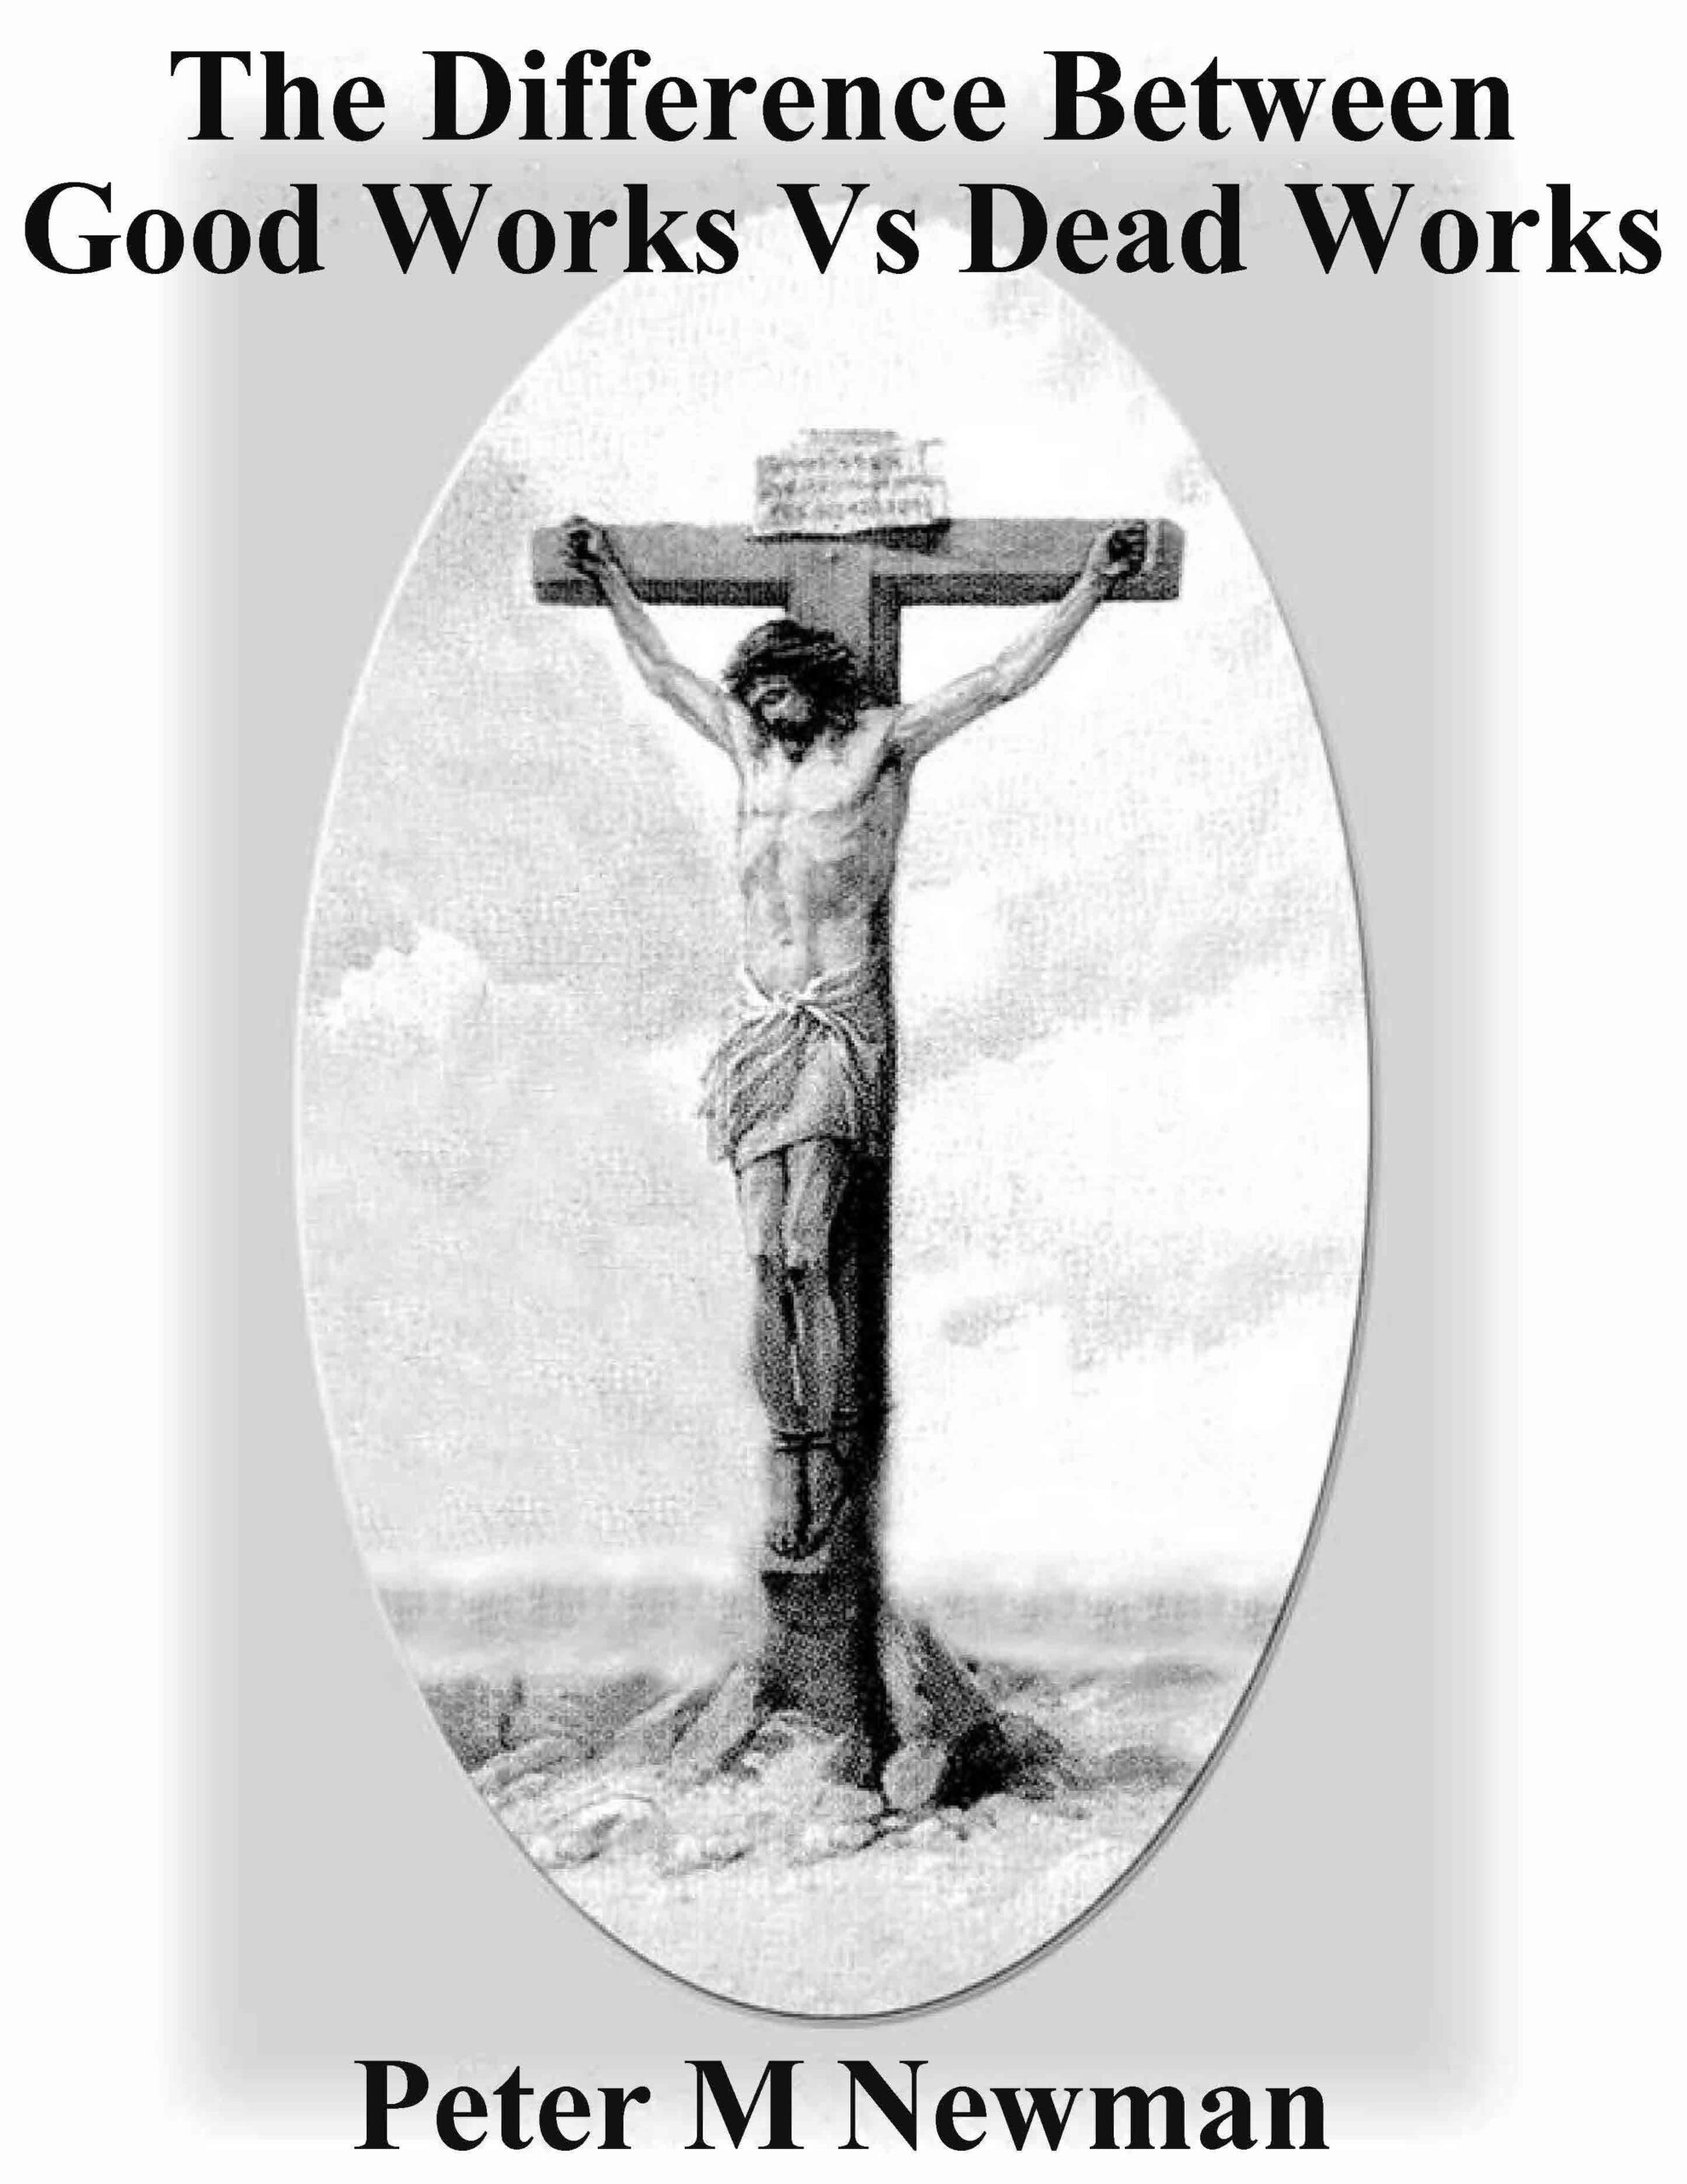 The Difference Between Good Works and Dead Works